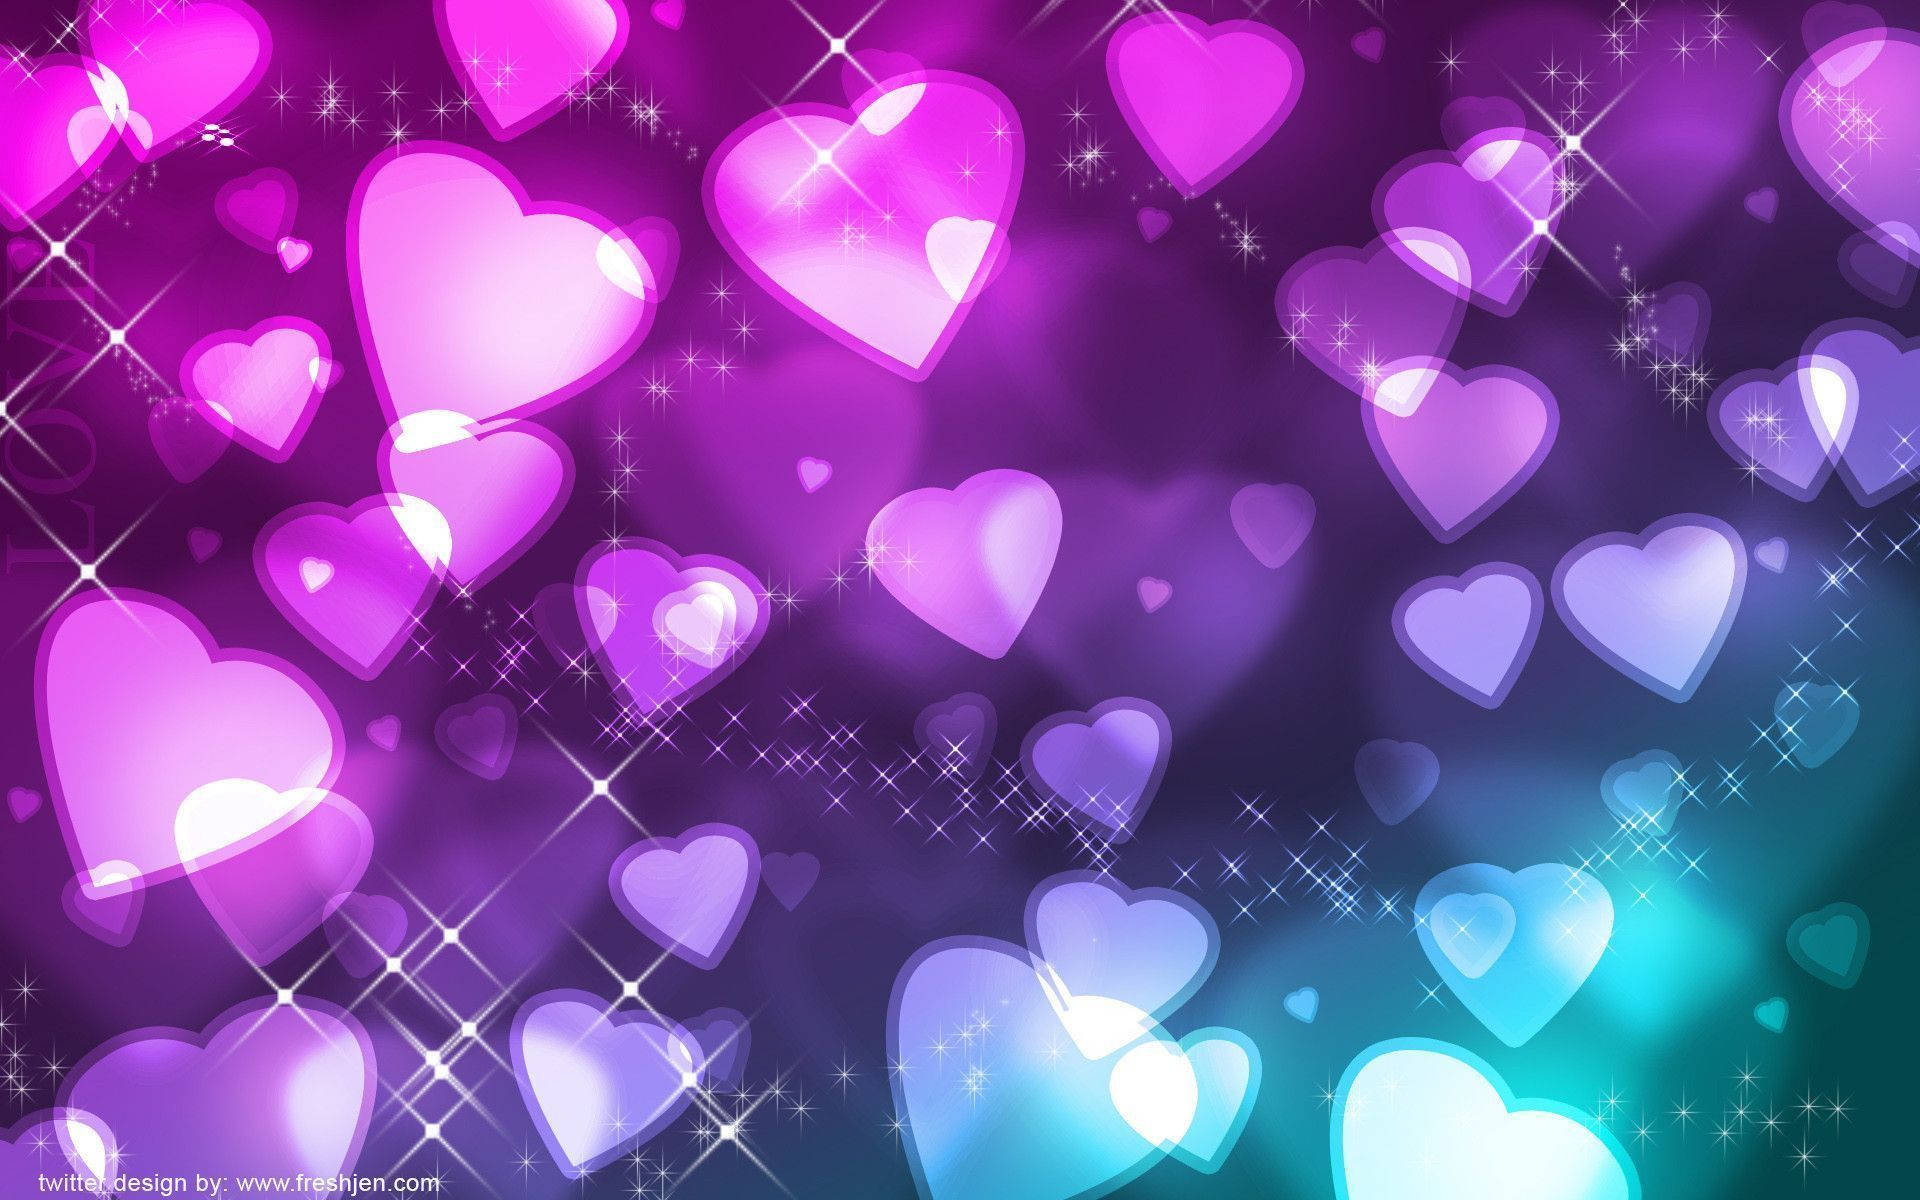 Purple And Teal Love Hearts Wallpaper